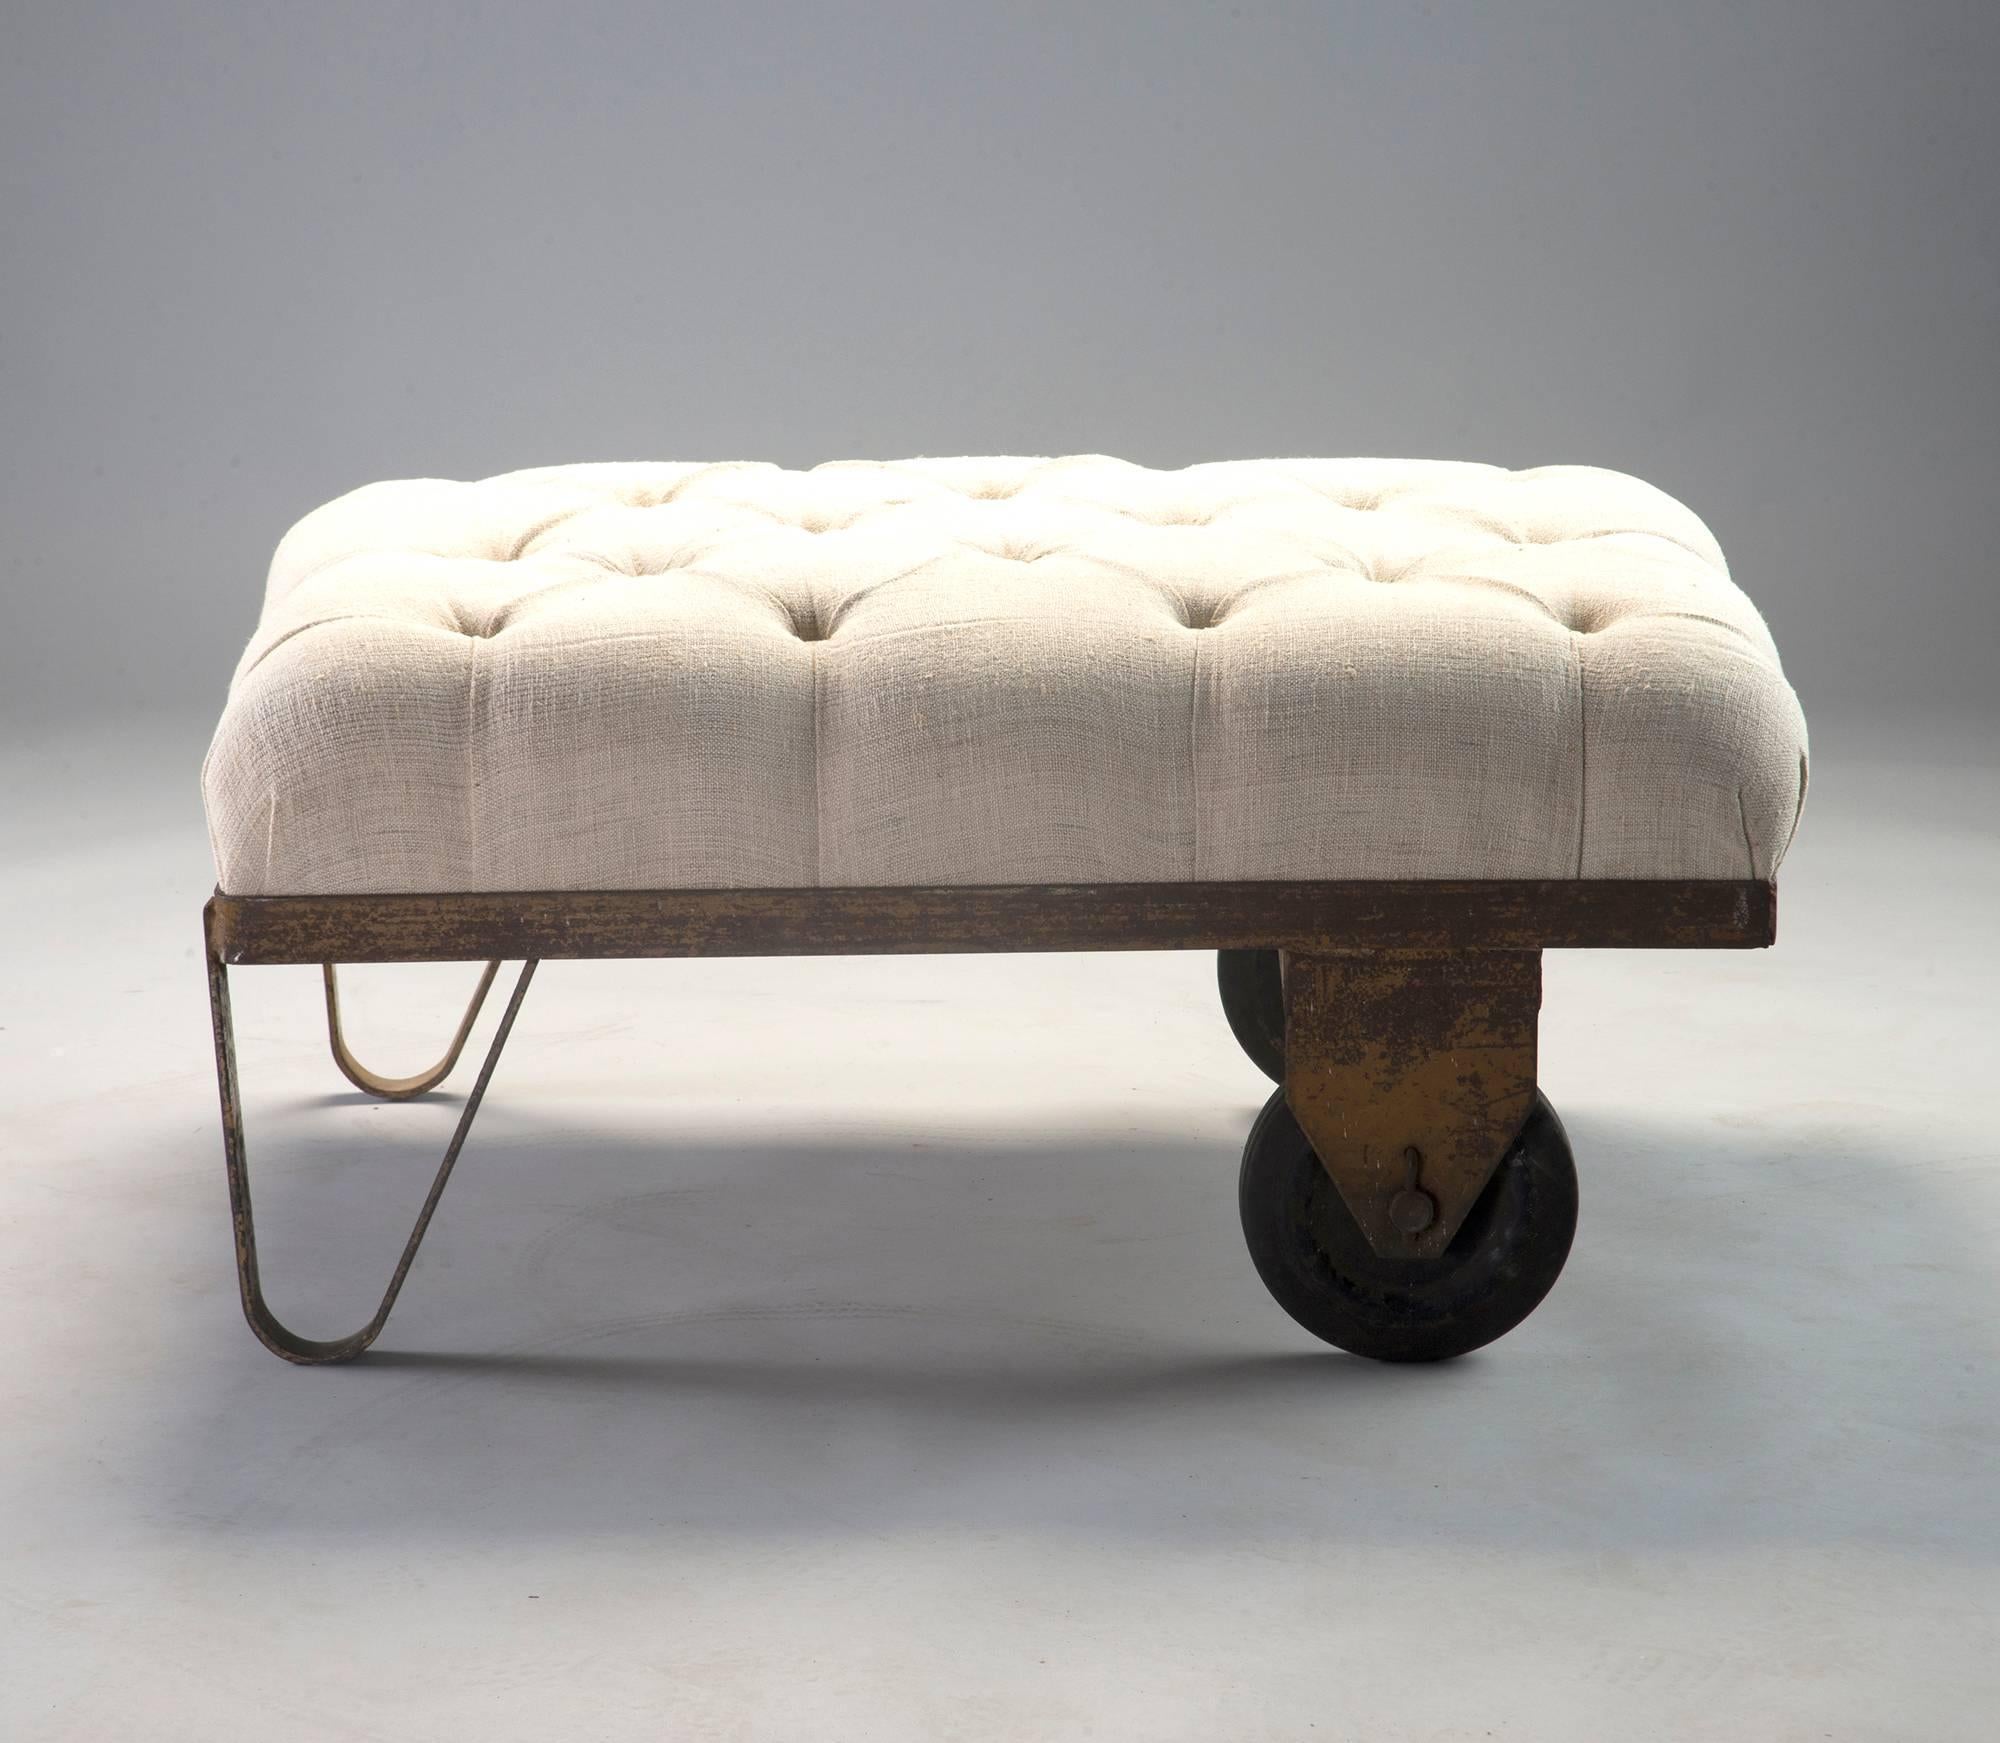 Stool, ottoman or bench made with circa 1930s industrial factory wheelbarrow base. Base of cast metal has remnants of original painted finish and rusty patina. Two rubber wheels and legs with newly upholstered top in tufted, natural colored linen.